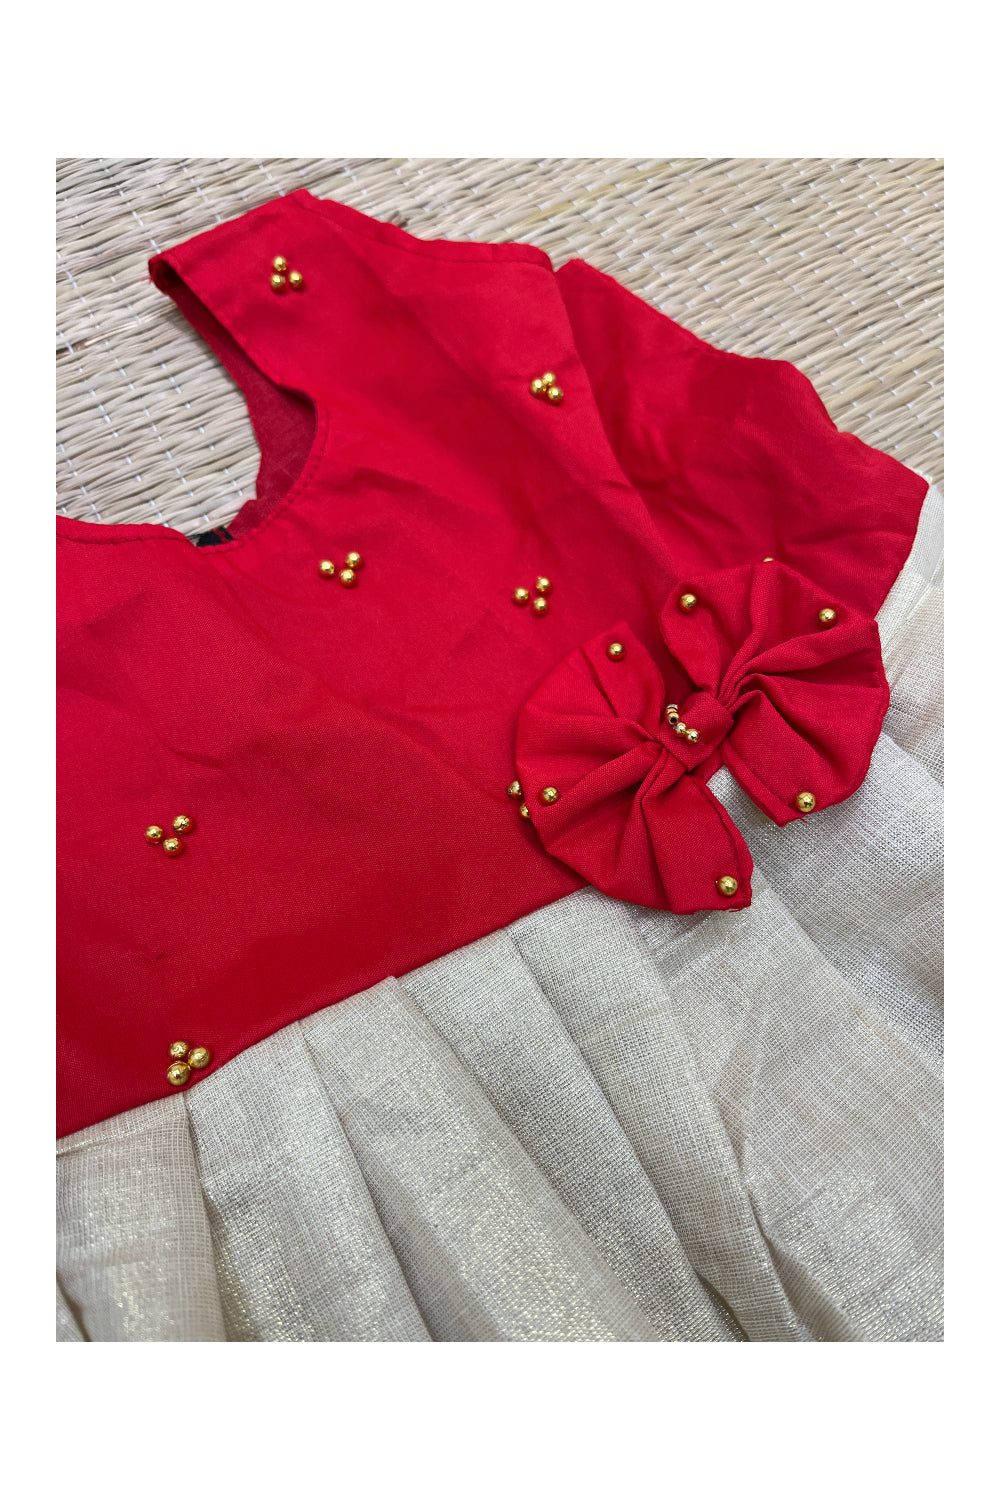 Southloom Kerala Tissue Frock with Red Bead Work Designs for Kids (2 Years)